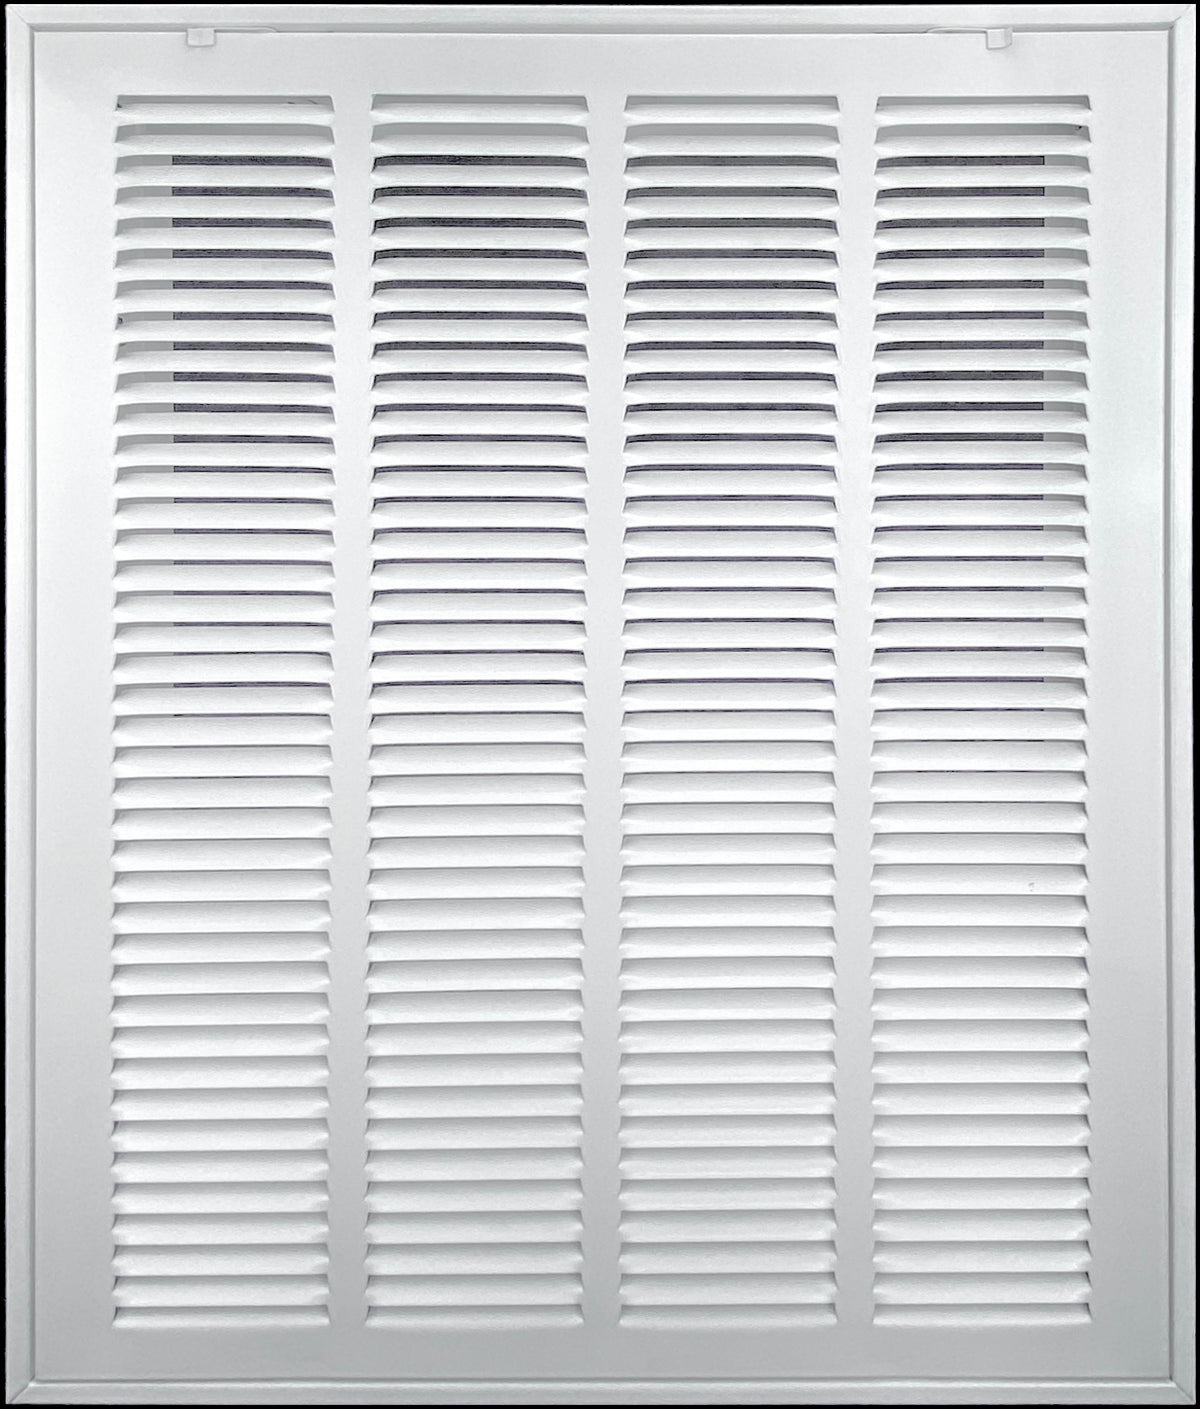 airgrilles 20" x 30" duct opening   hd steel return air filter grille for sidewall and ceiling  agc  7agc-1raf-wh-20x30 756014649451 - 1